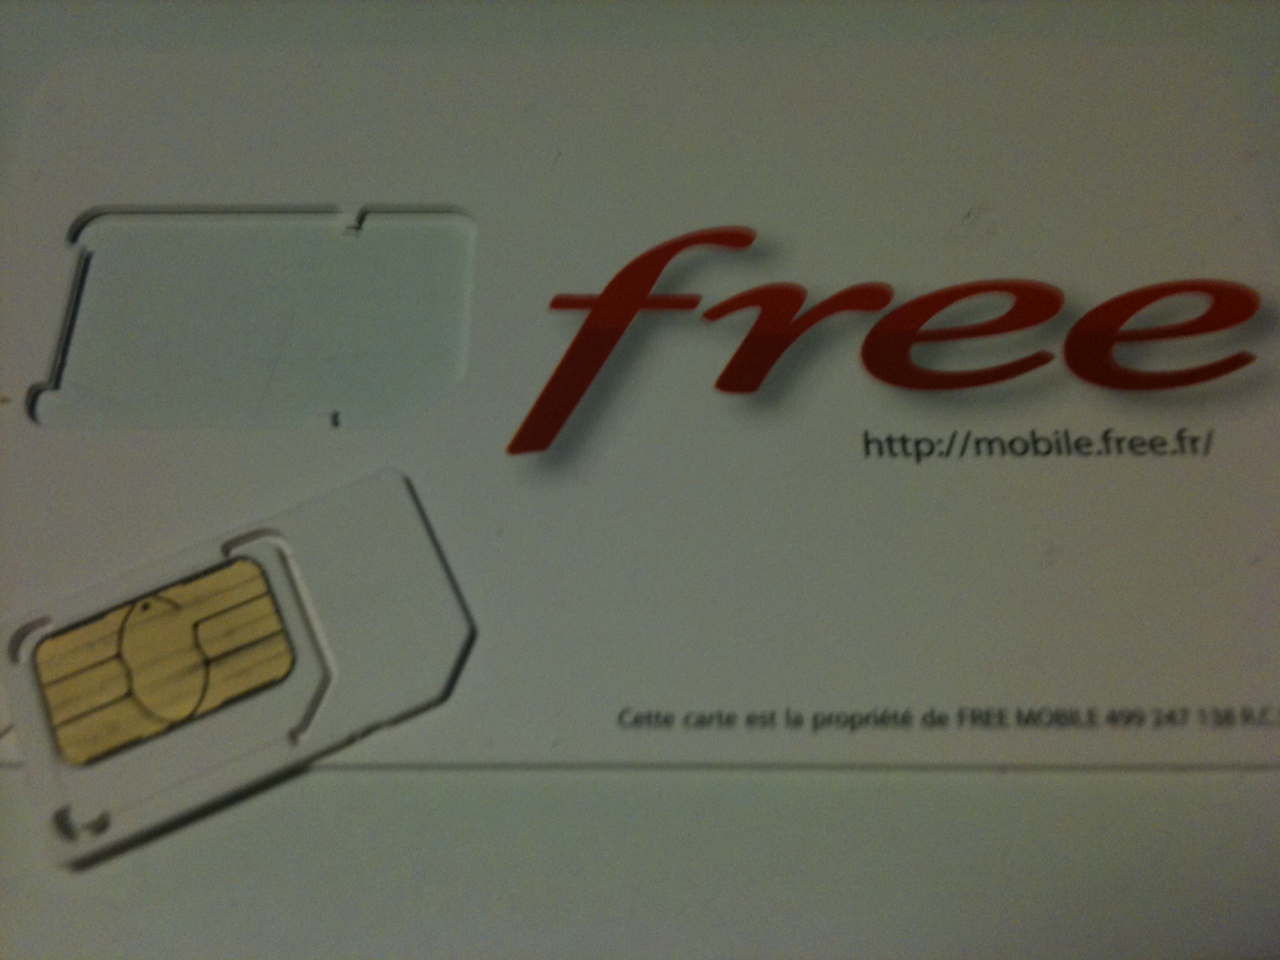 https://www.silicon.fr/wp-content/uploads/2012/02/Carte-SIM-Free-Mobile.jpg